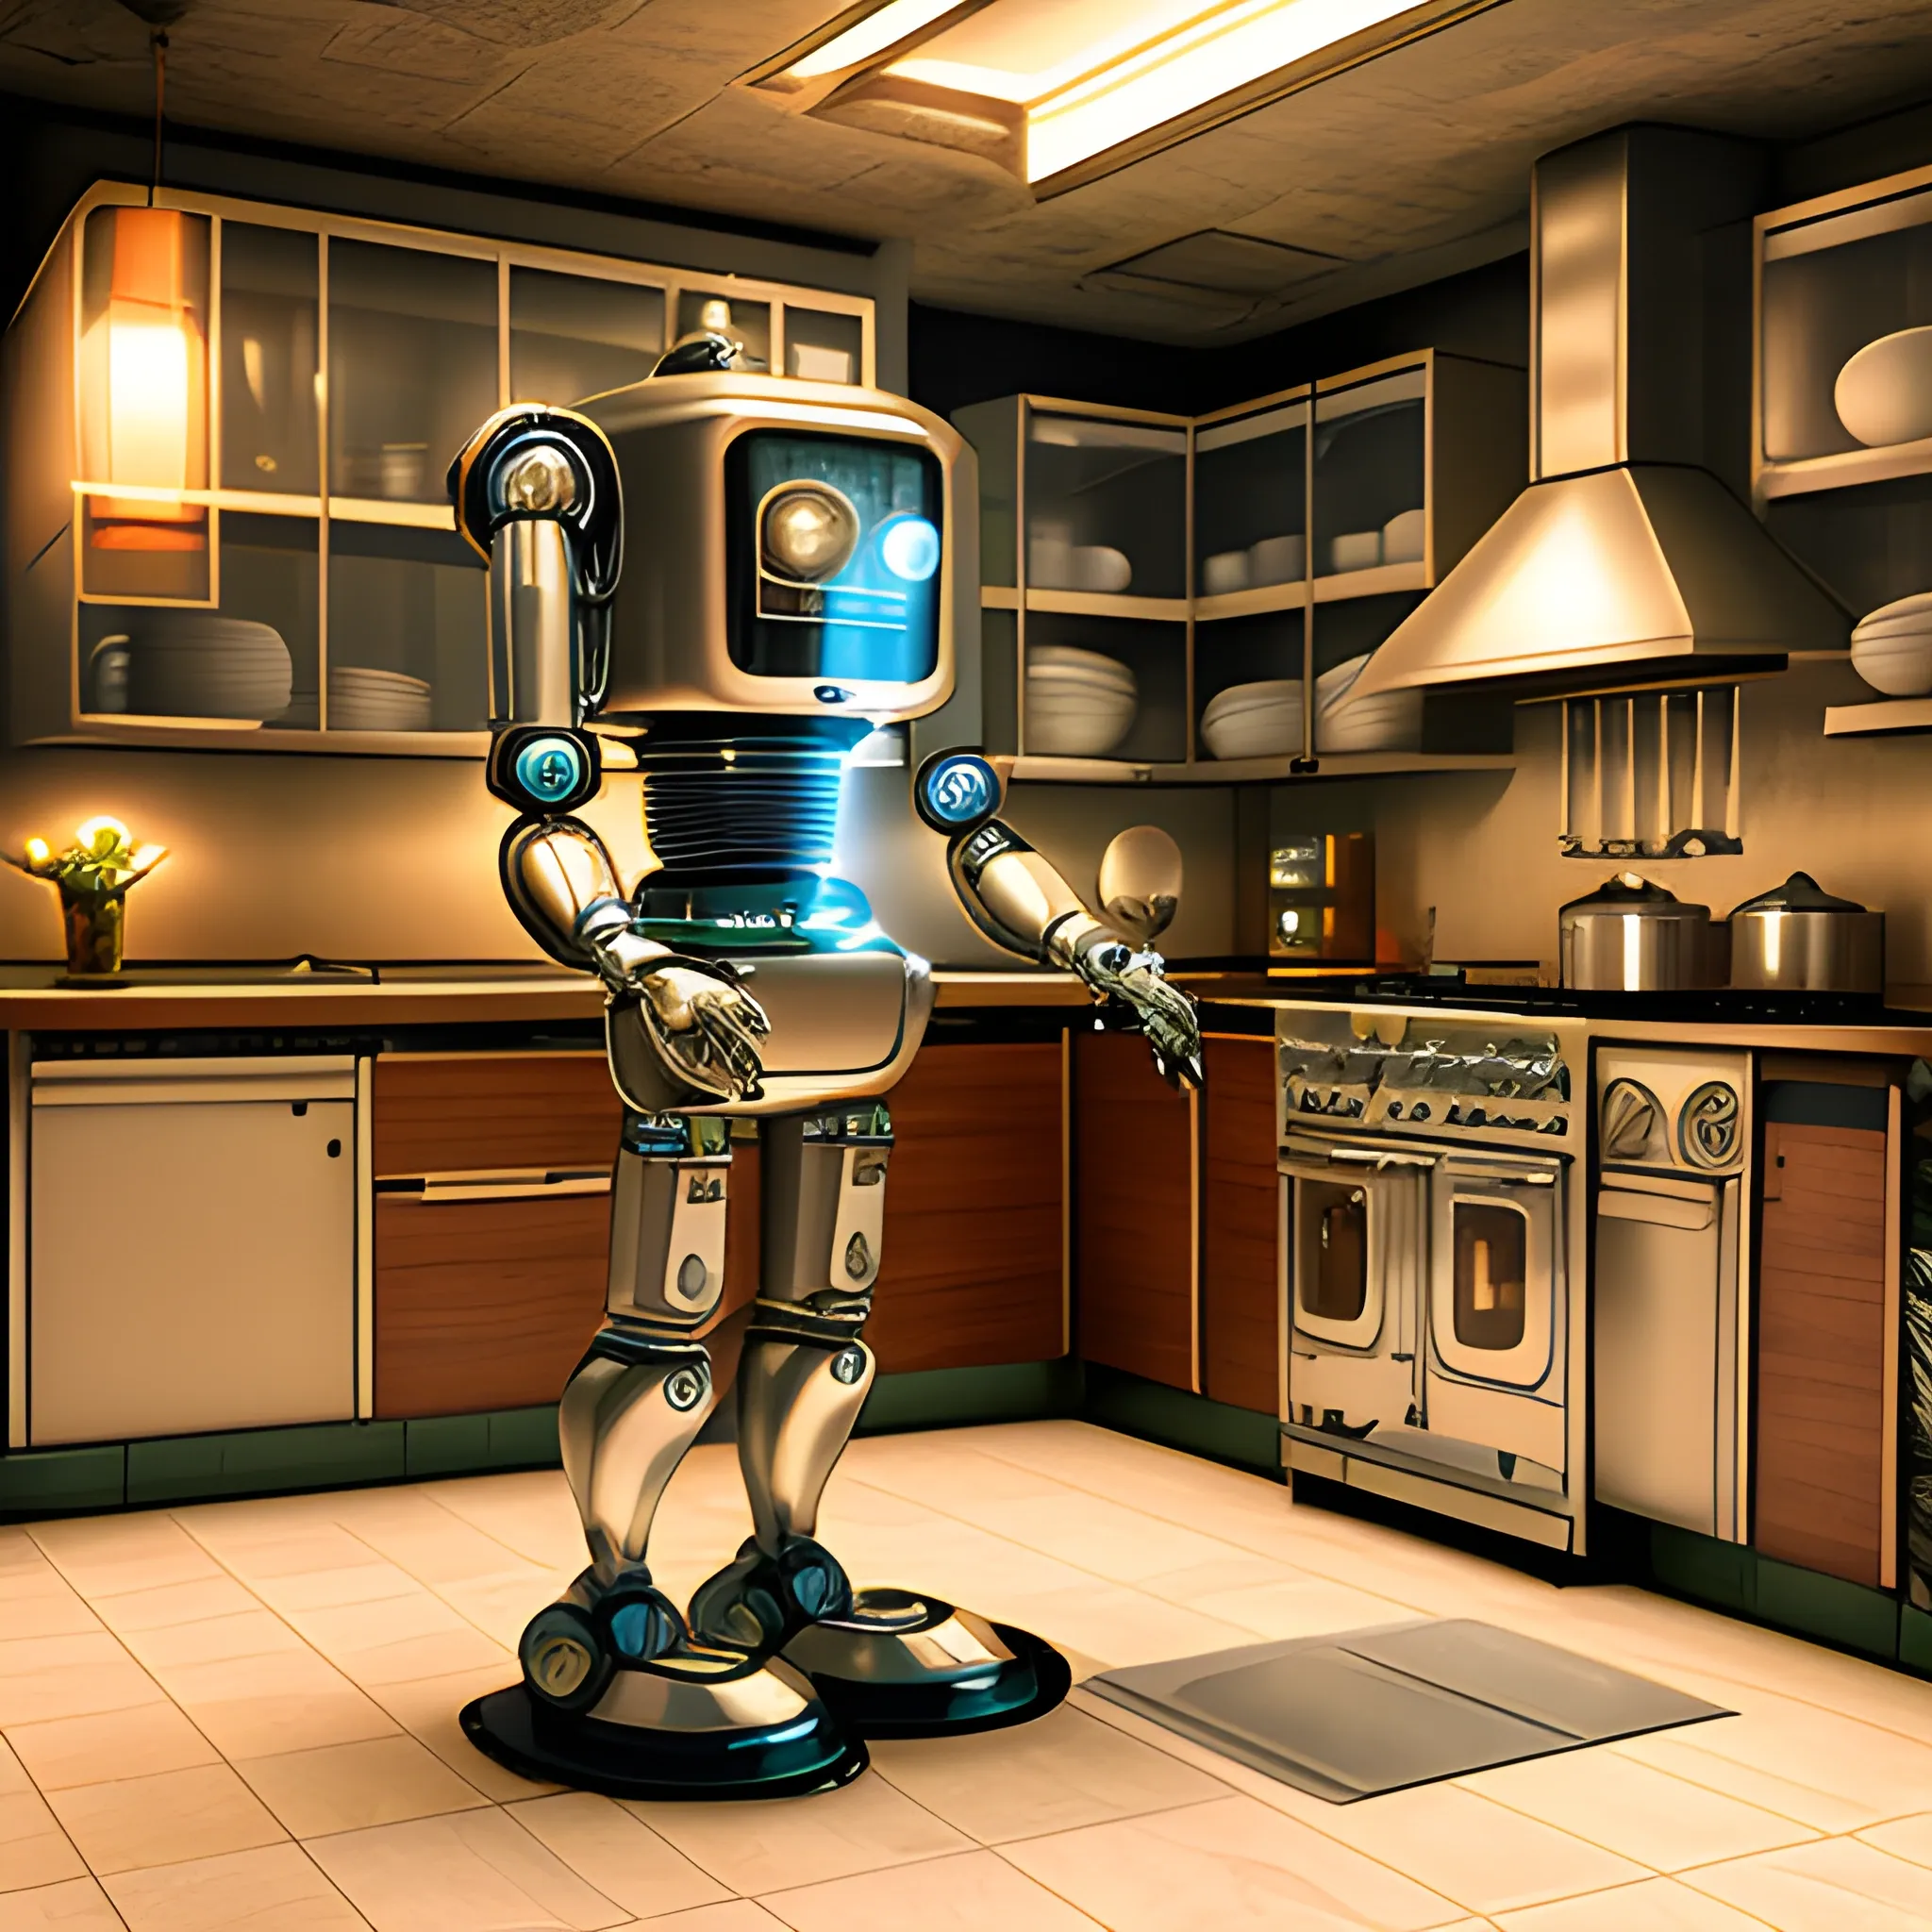 Kitchen, fancy dinner, retro futuristic, highly detailed, realistic, 4k, robot maid